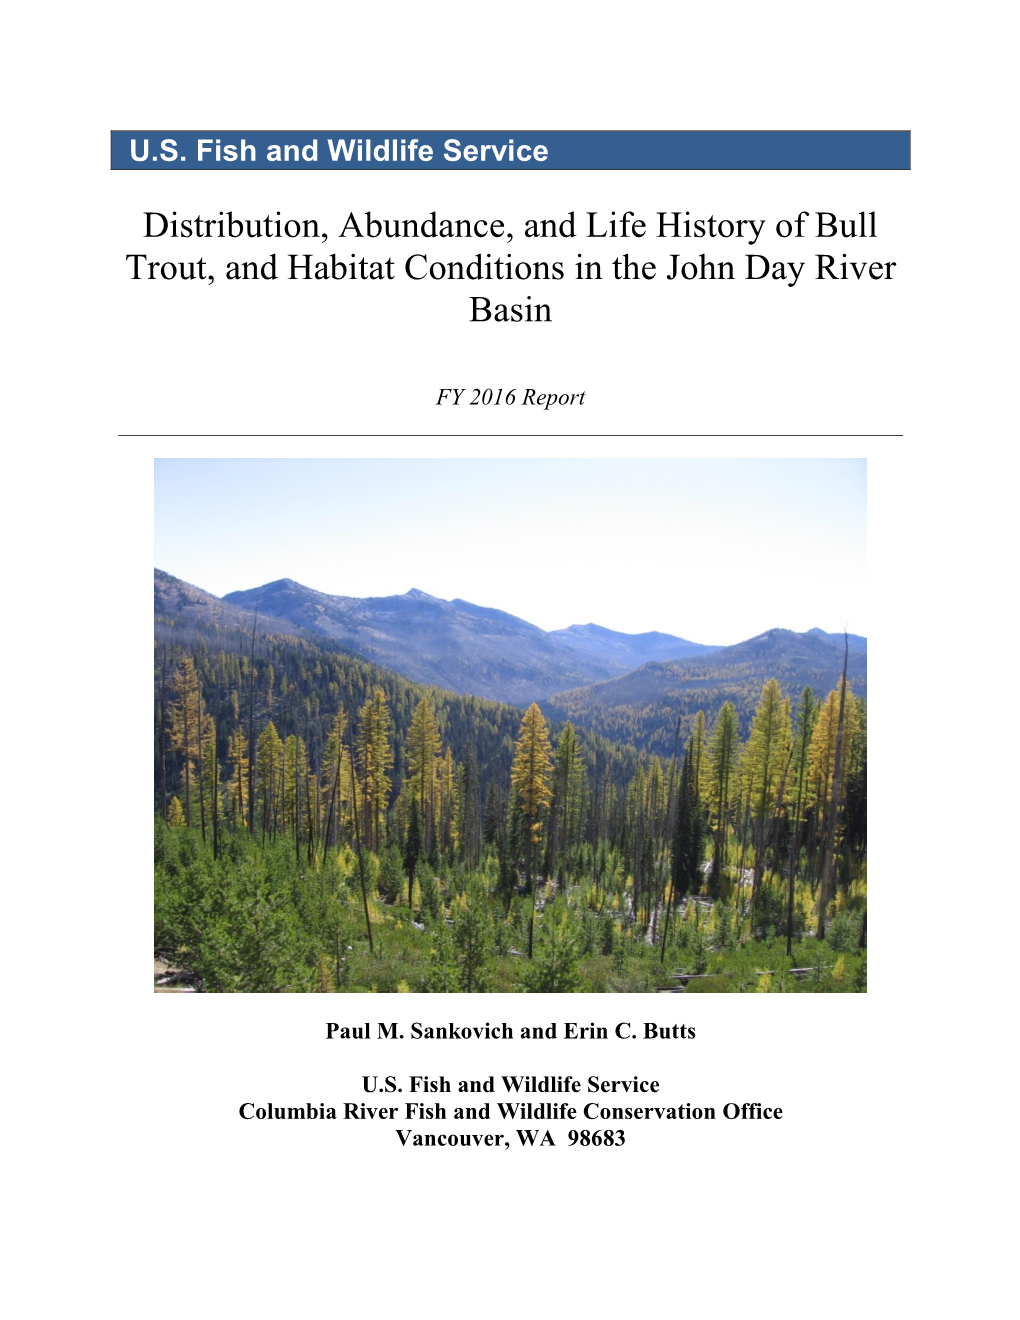 Distribution, Abundance, and Life History of Bull Trout, and Habitat Conditions in the John Day River Basin